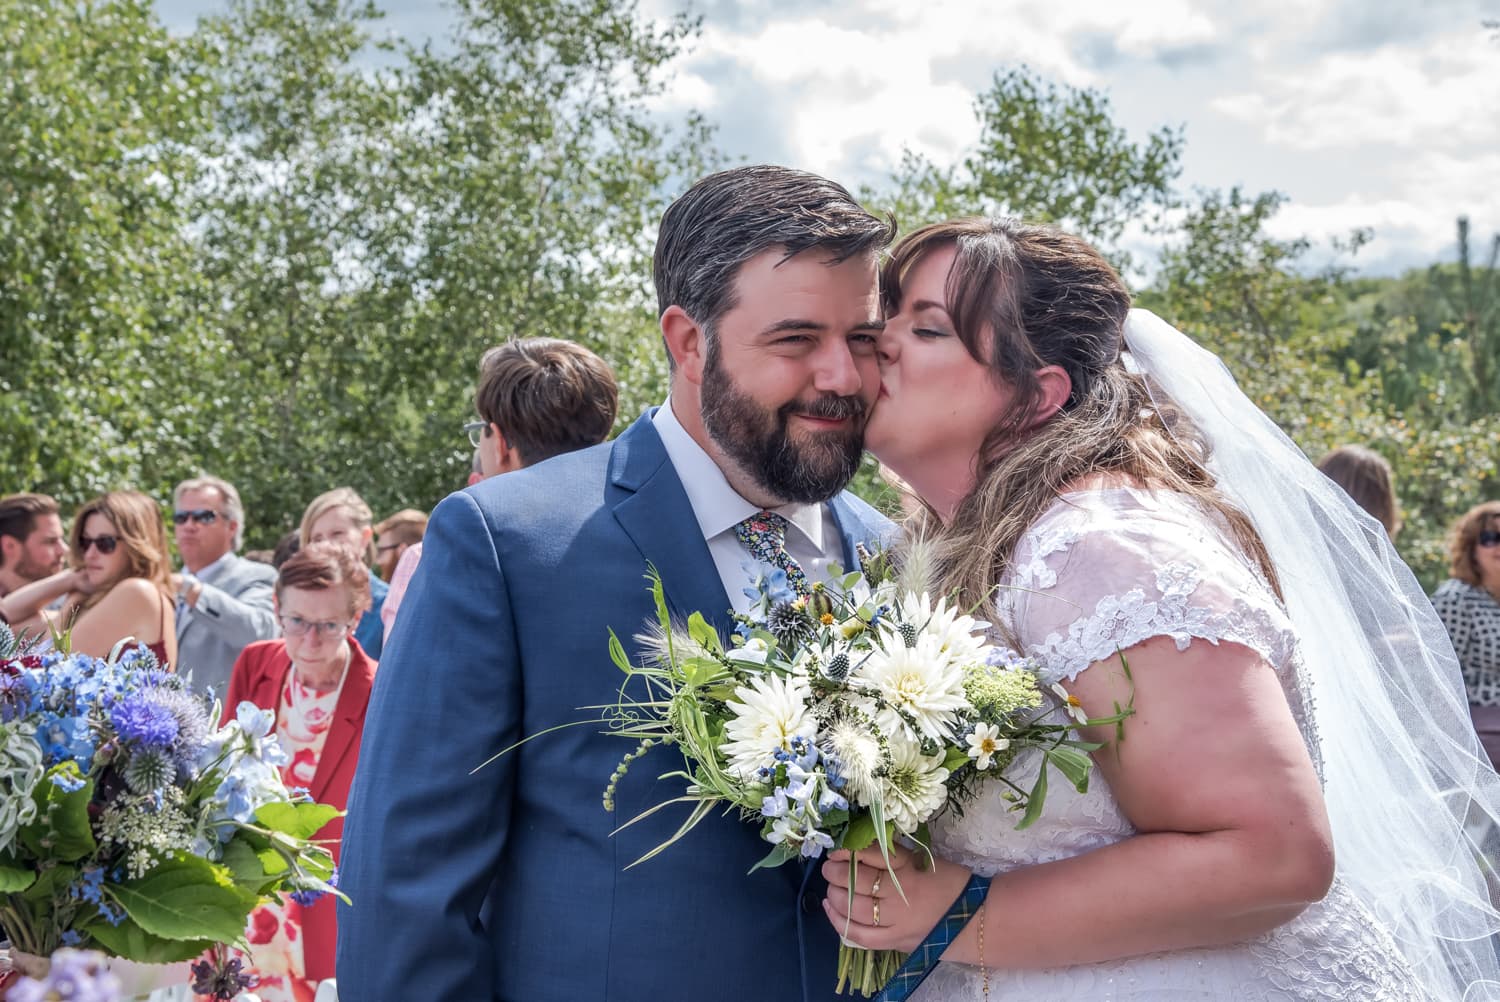 The bride and groom share a kiss after their wedding ceremony at the Best Western in Chocolate Lake Halifax, NS.